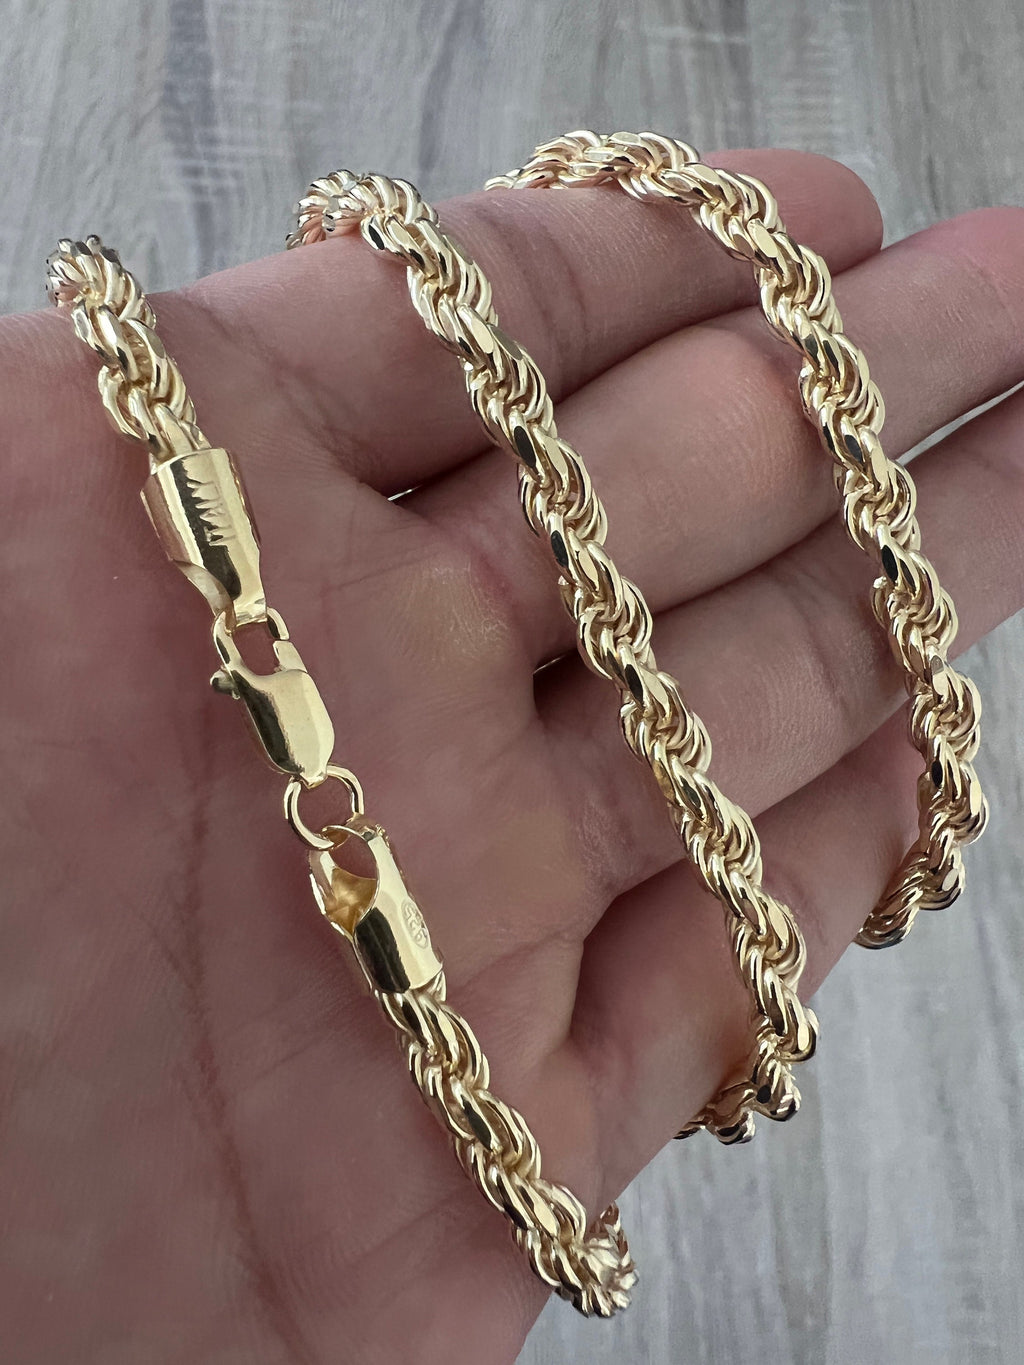 5mm Rope 14K Gold Vermeil Over Solid 925 Sterling Silver Chain Necklace  Diamond Cut Men Women